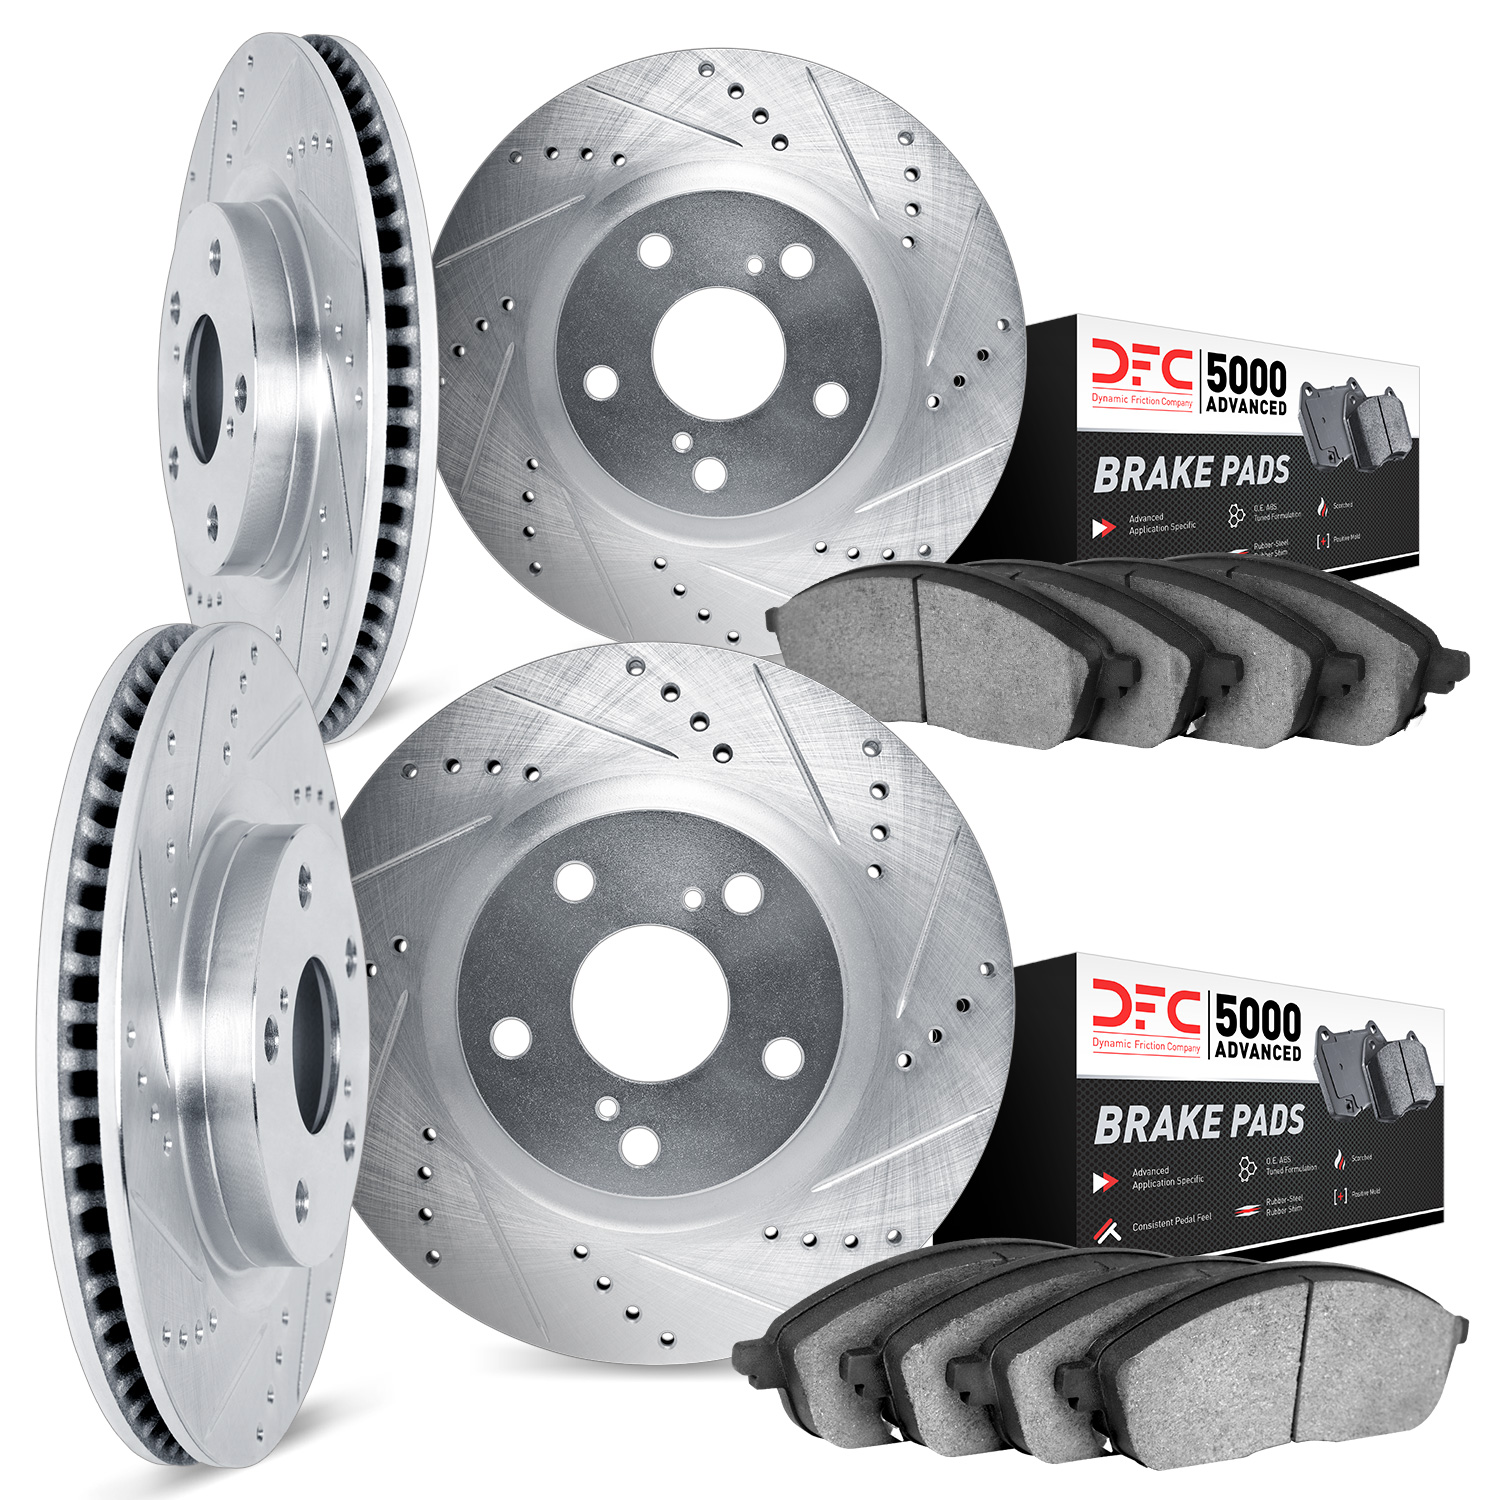 7504-31067 Drilled/Slotted Brake Rotors w/5000 Advanced Brake Pads Kit [Silver], 2011-2014 BMW, Position: Front and Rear